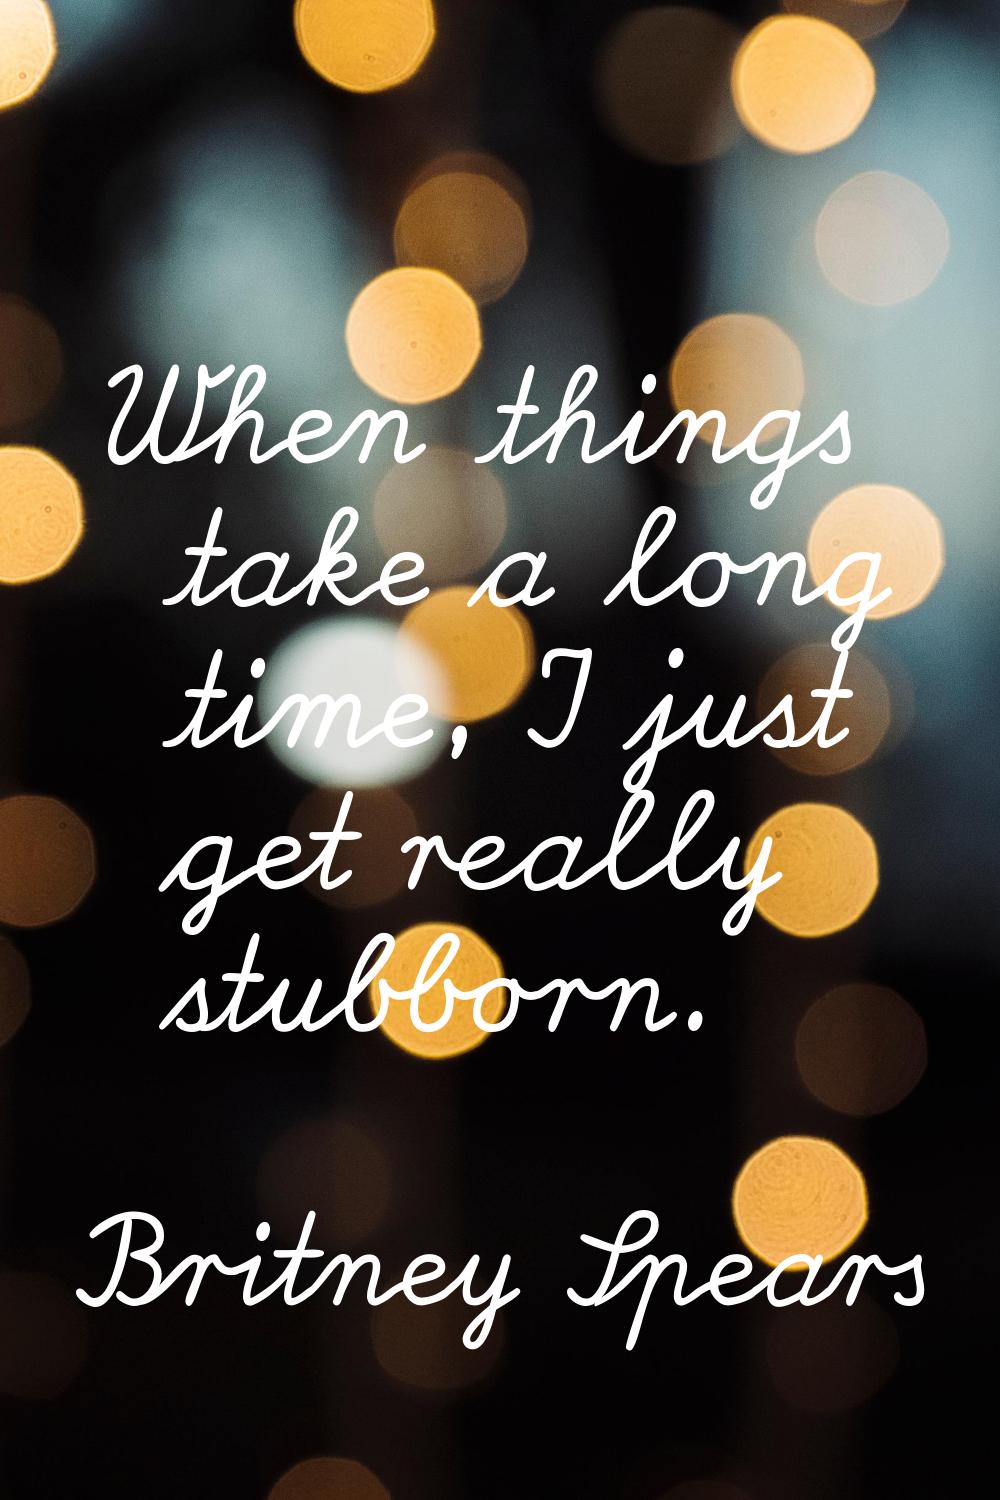 When things take a long time, I just get really stubborn.